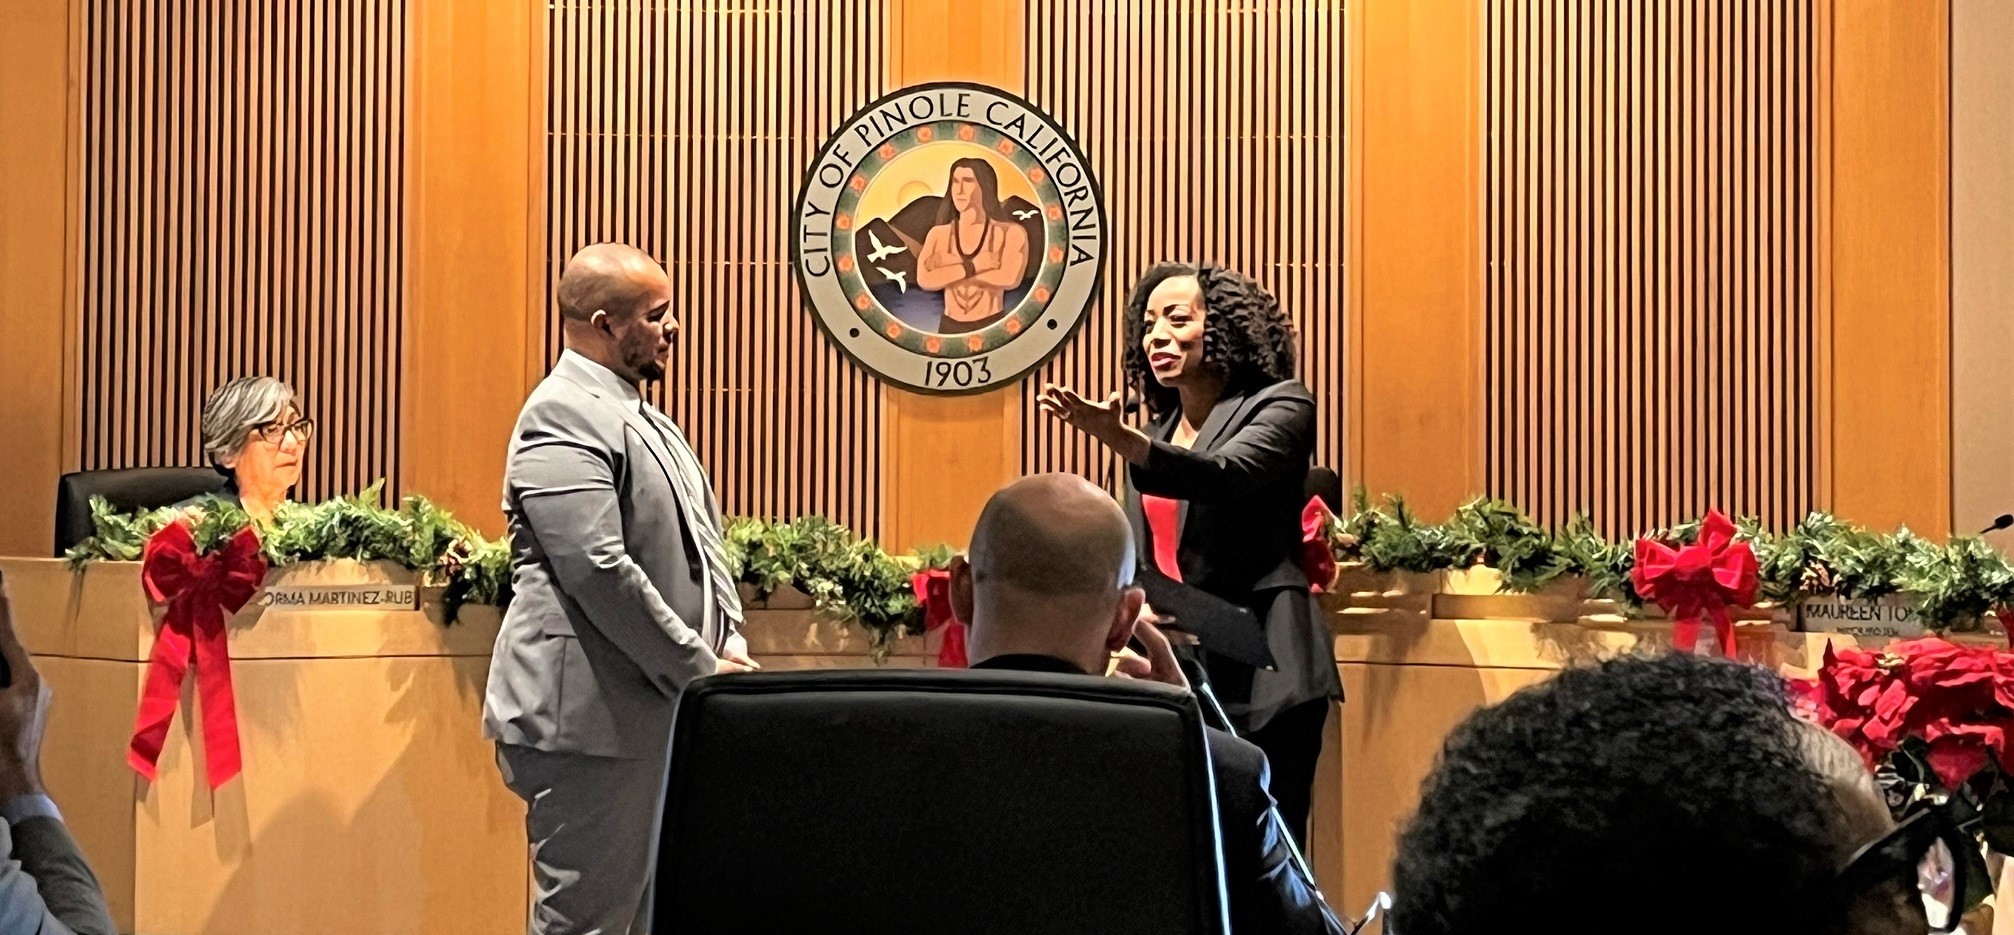 Pinole Mayor Devin T Murphy at swearing-in ceremony